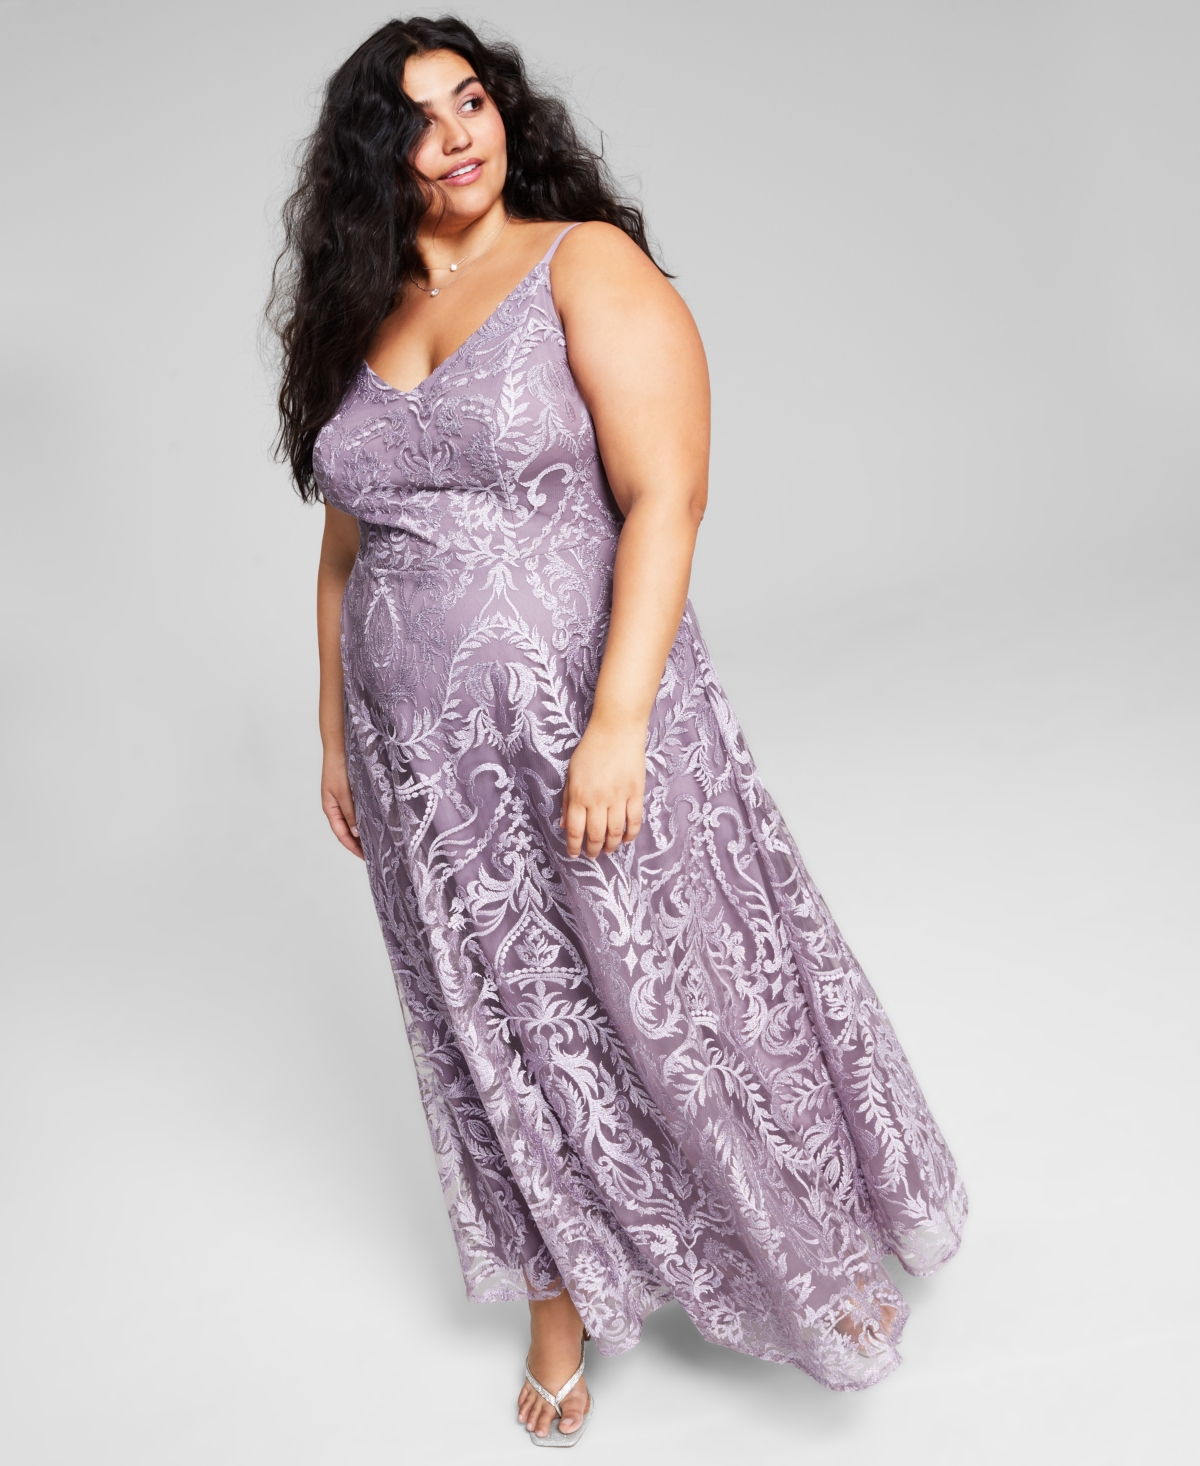 Trendy Speechless Plus Size Embroidered Gown, Created for Macy's - Mauve/Lavender